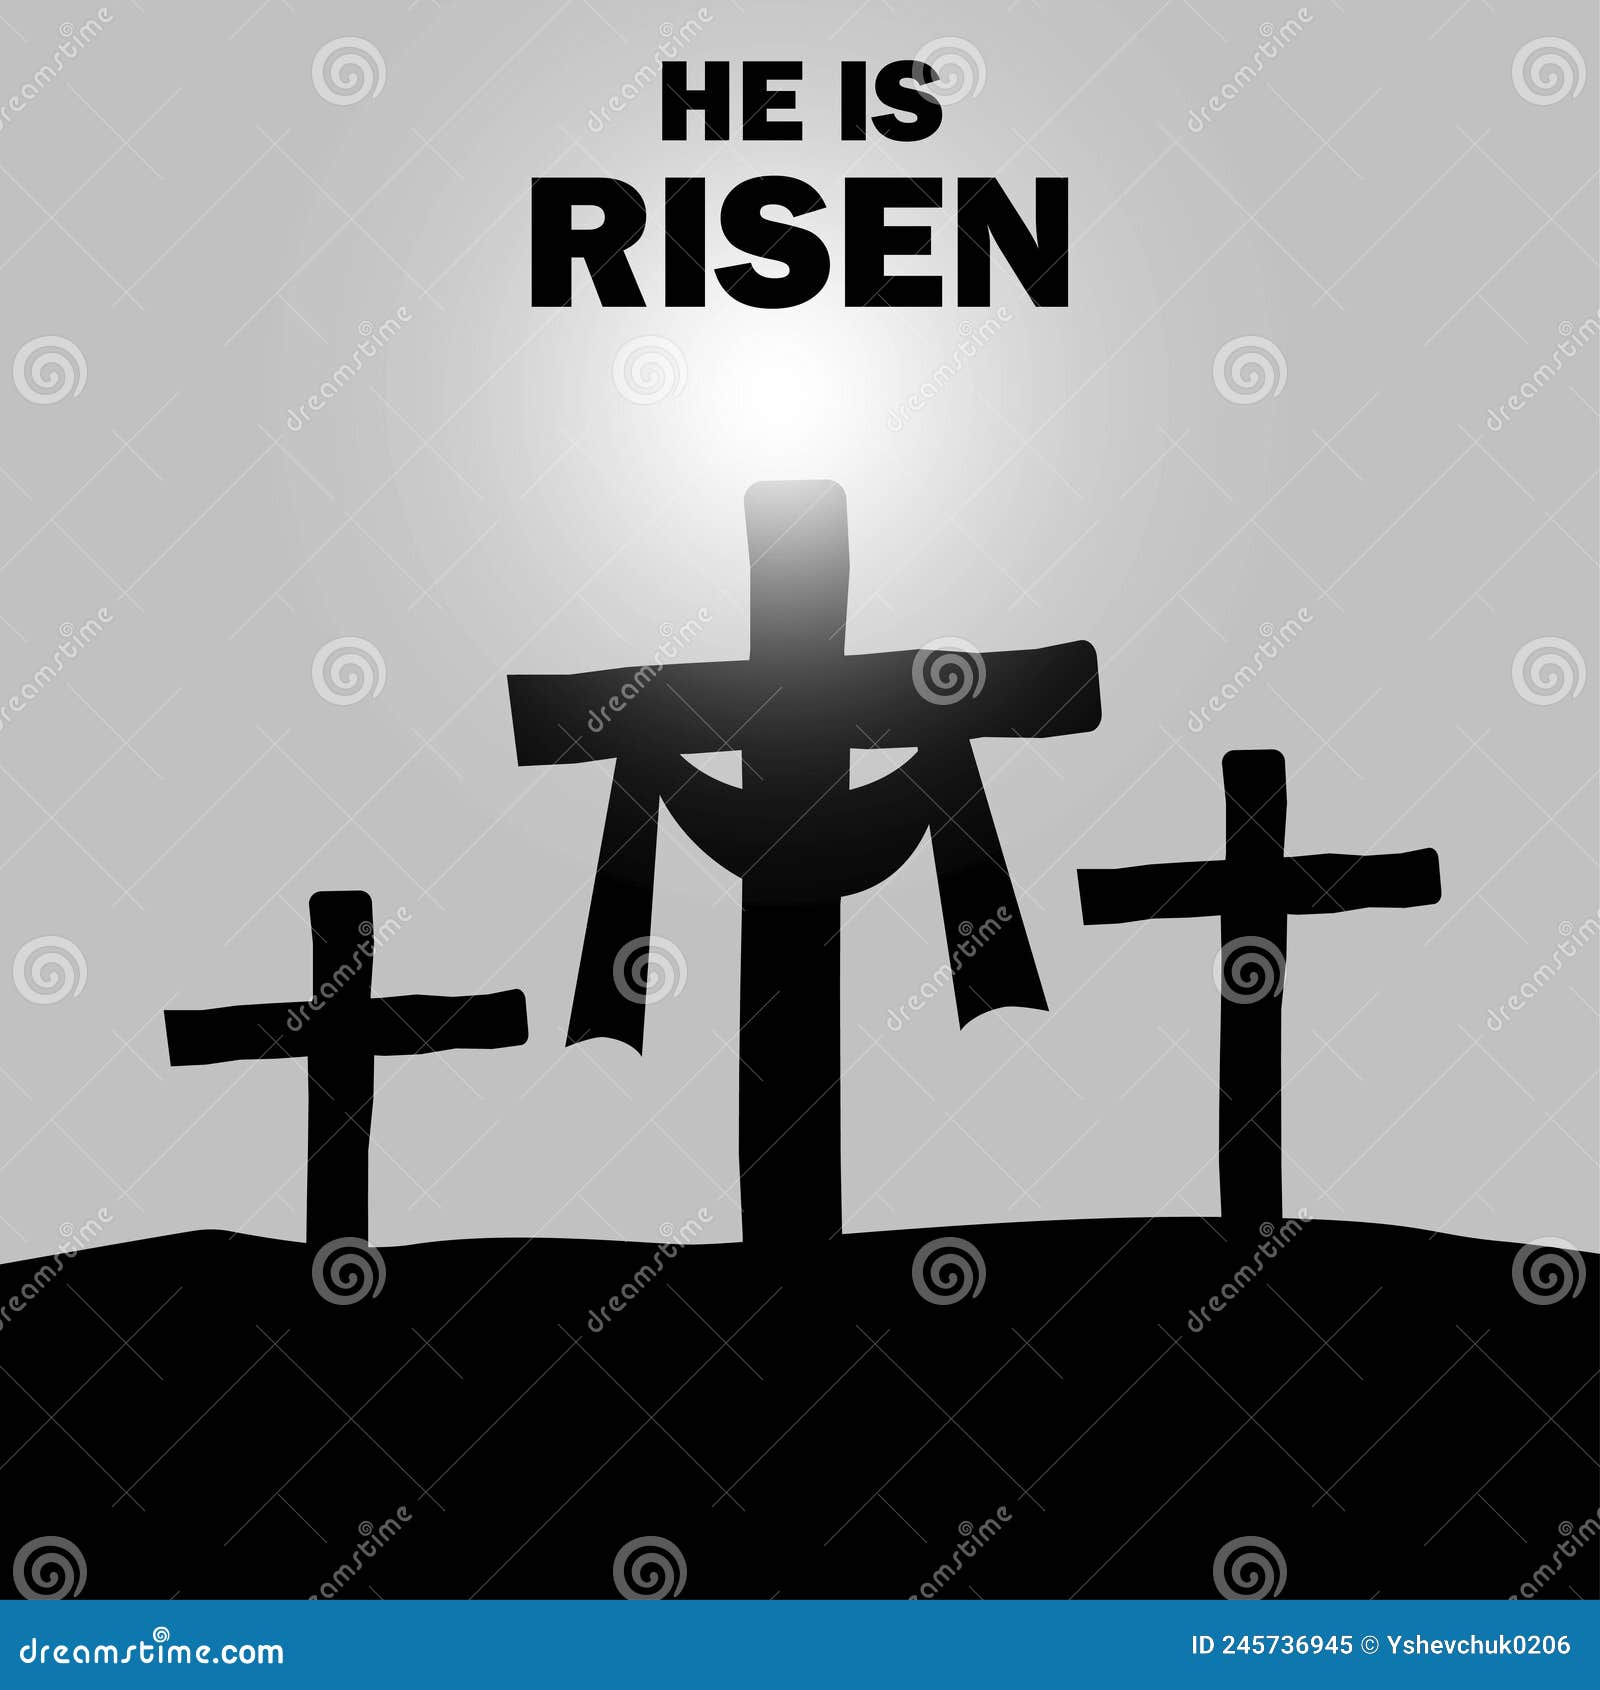 Easter 2022 Greetings & HD Images: Cheery Quotes, WhatsApp Status Messages,  Wallpapers, Sayings And Thoughts To Celebrate the Resurrection Day of Lord  Jesus | 🙏🏻 LatestLY